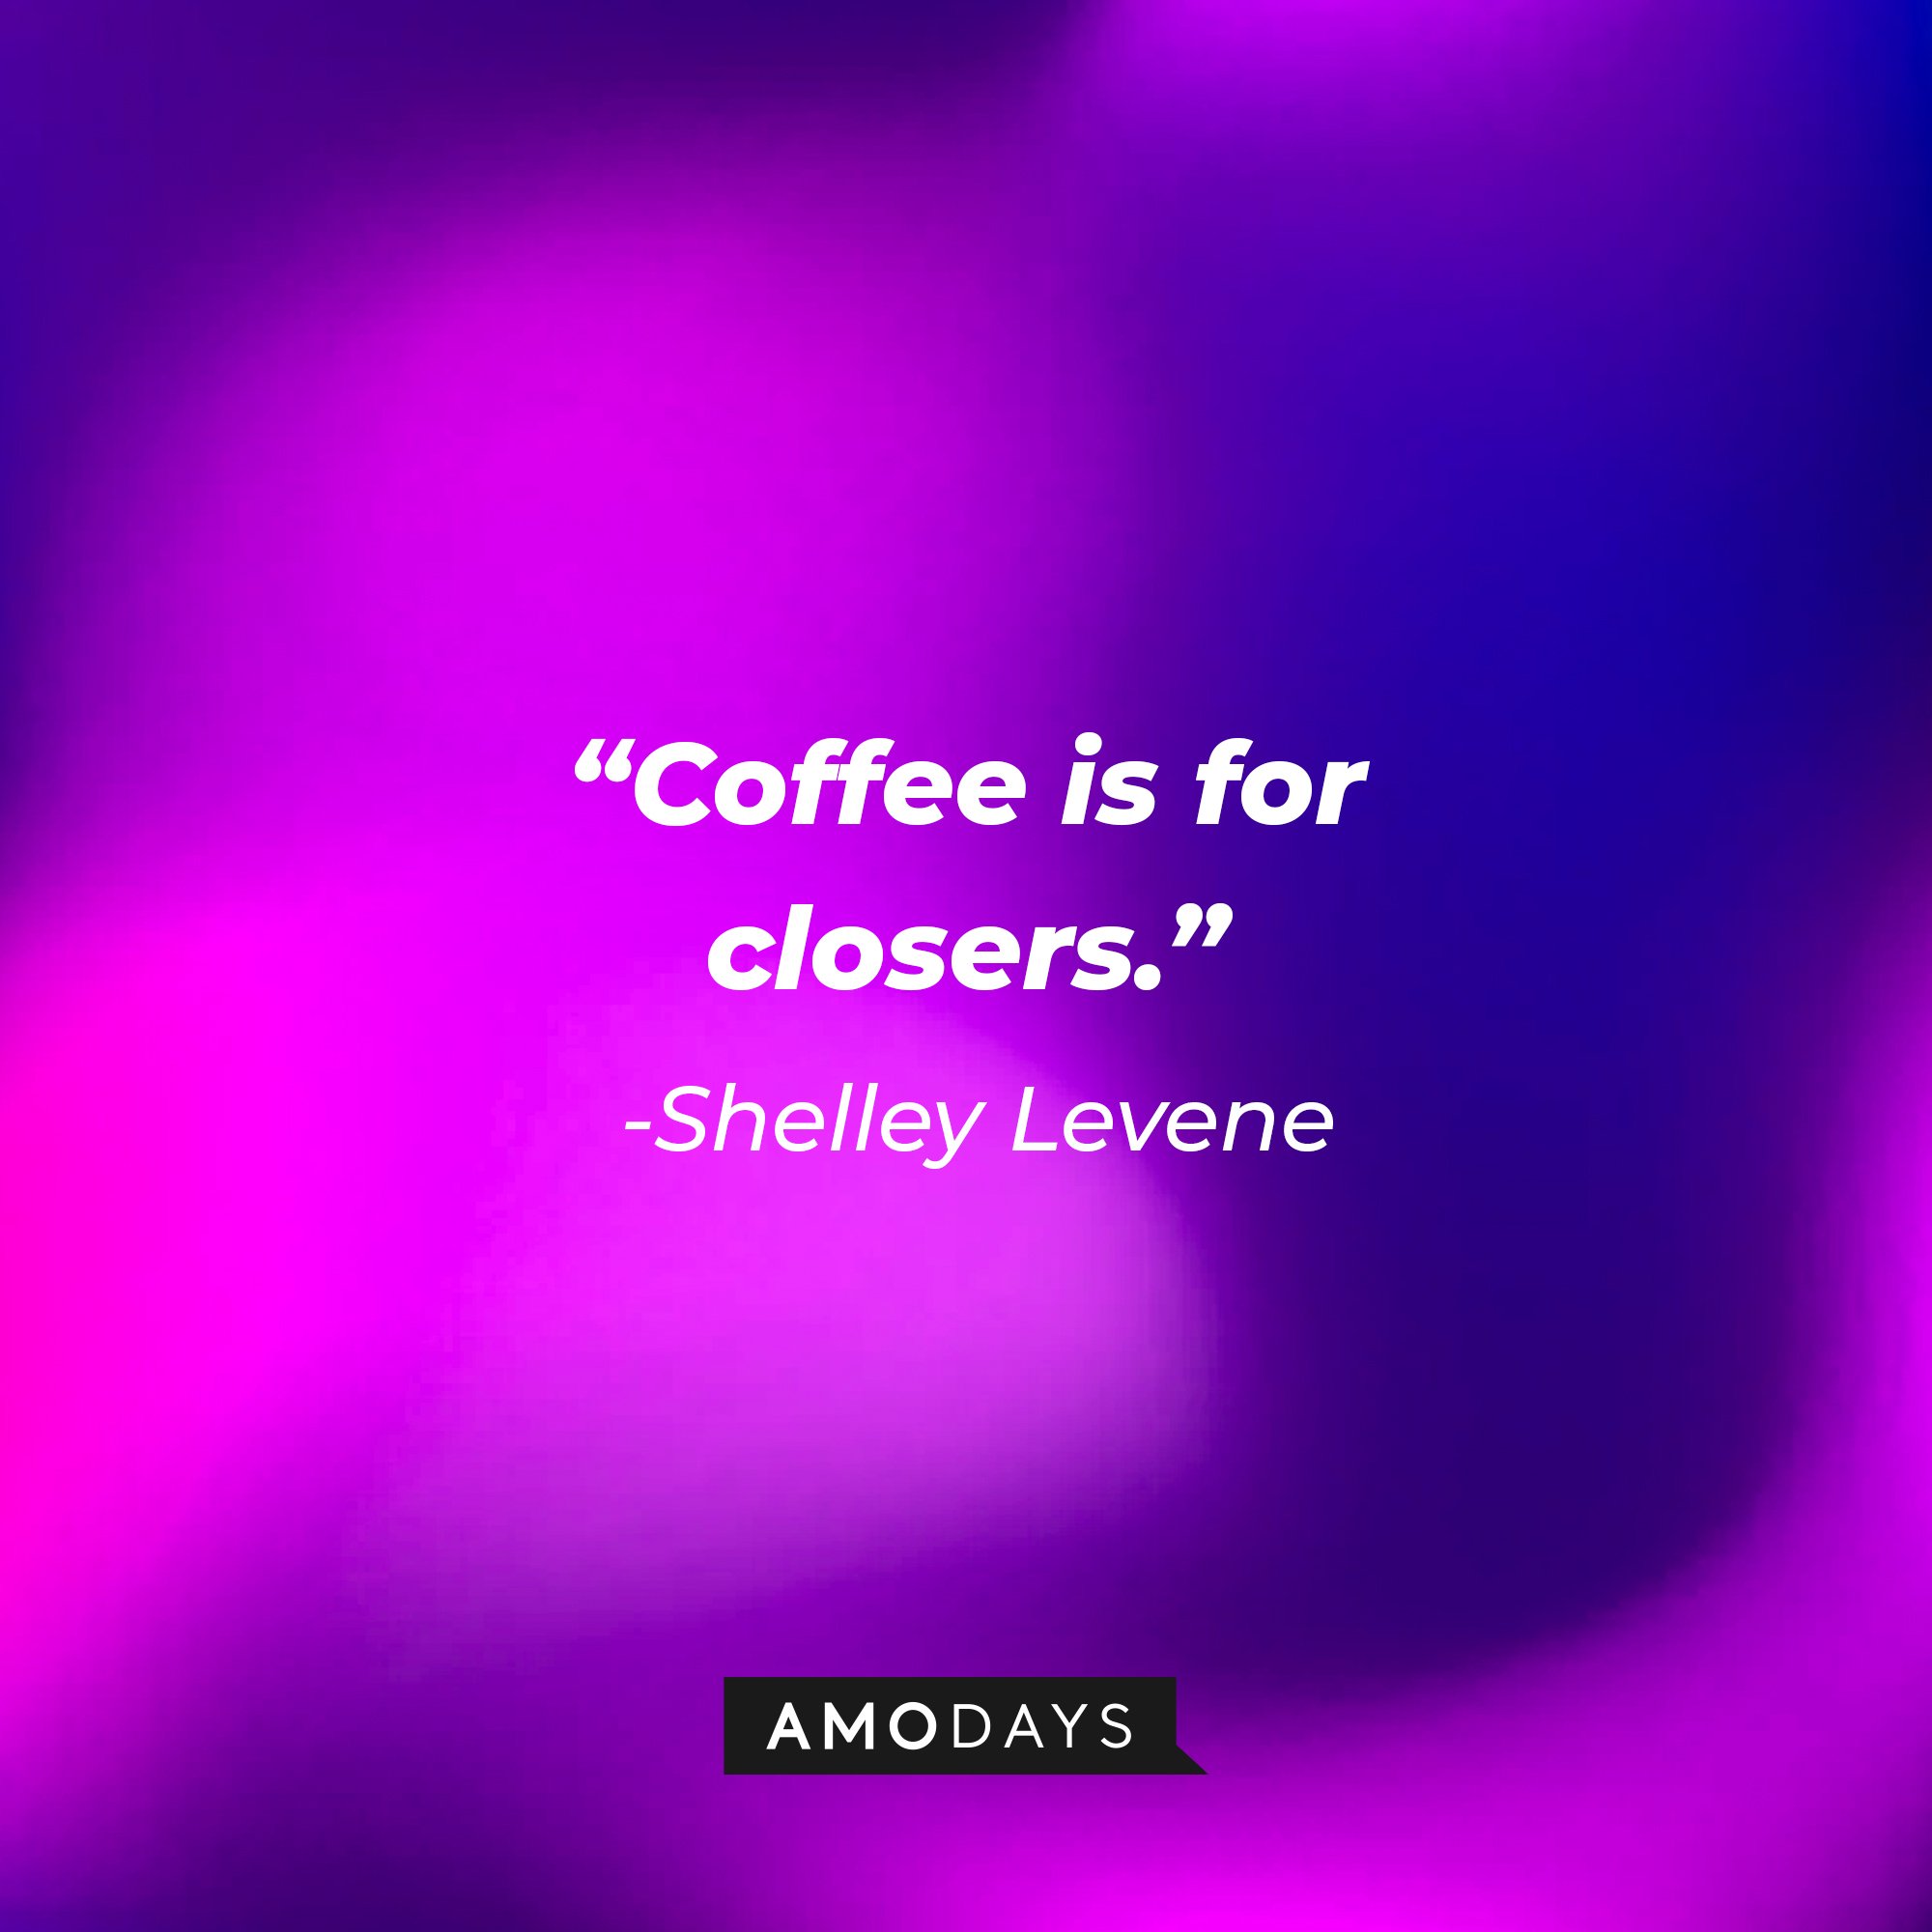 Shelley Levene's quote: "Coffee is for closers." | Image: AmoDays